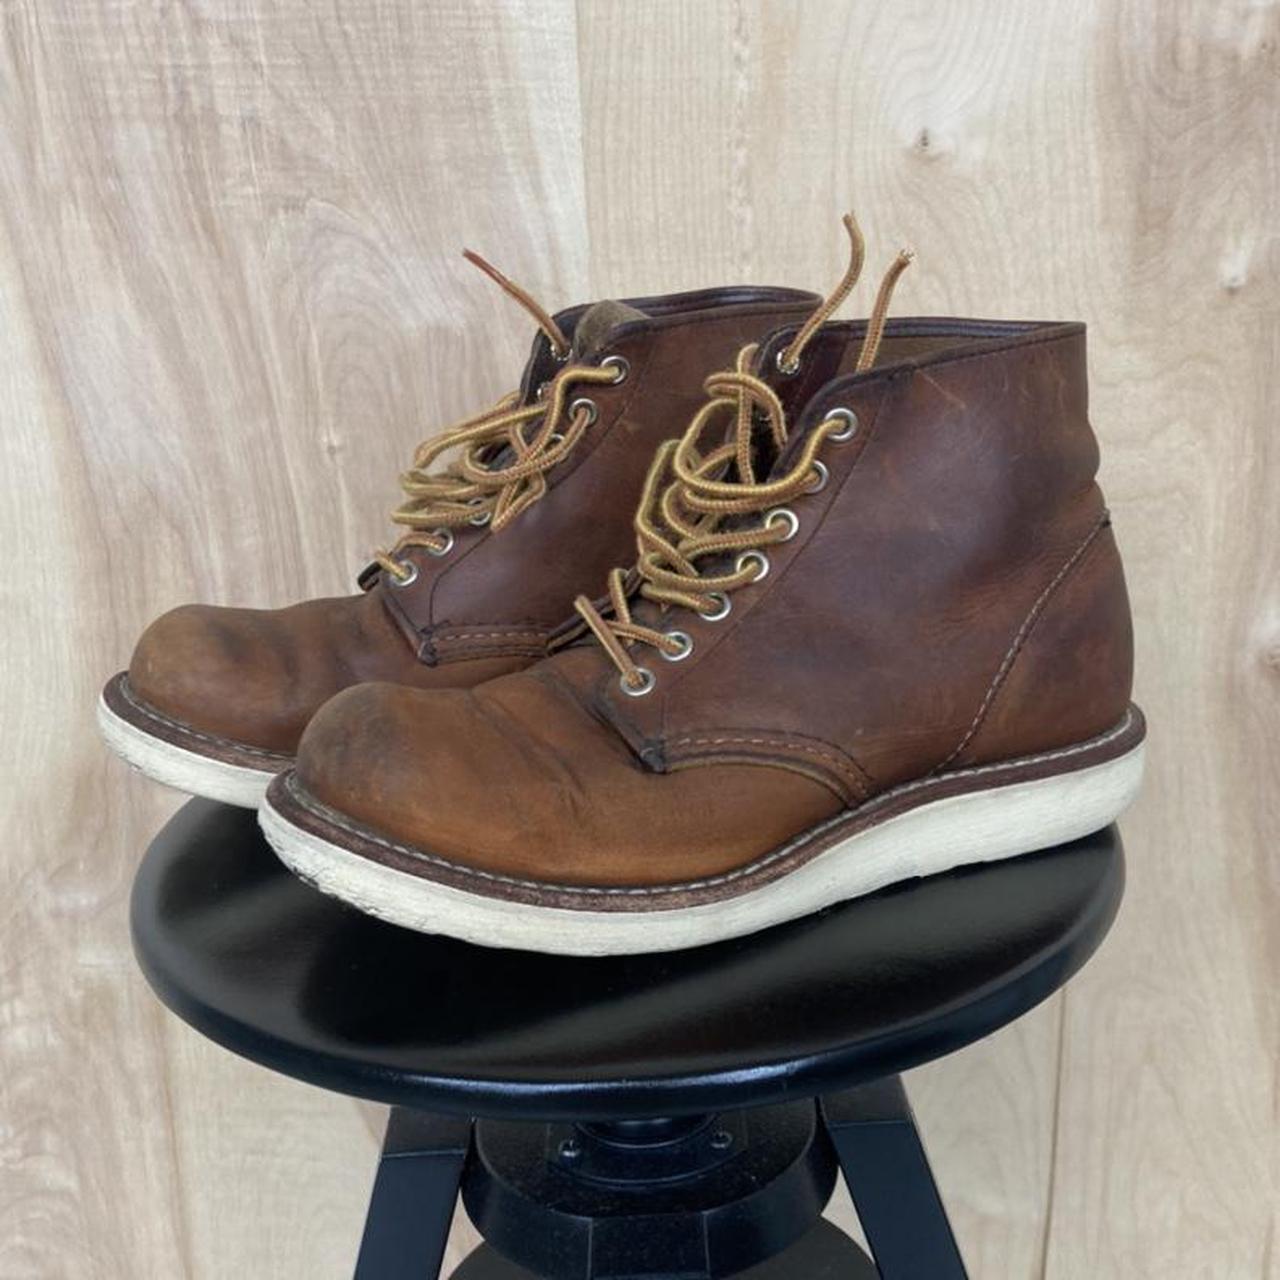 Product Image 1 - Red wings boots in brown